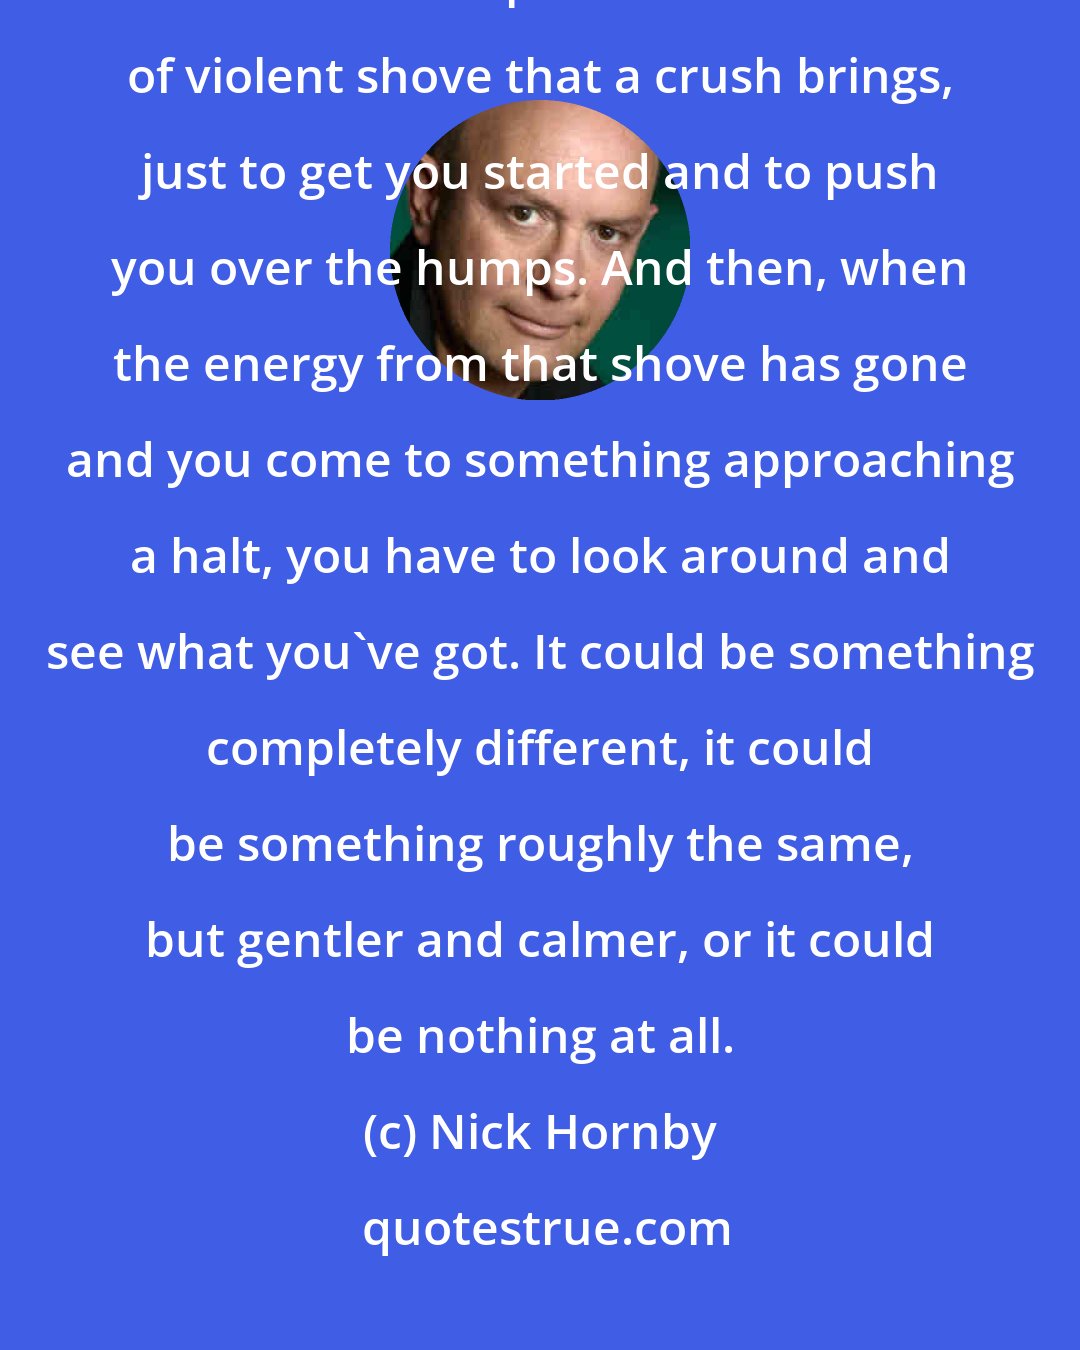 Nick Hornby: I used to think--and given the way we ended up, maybe I still do--that all relationships need the kind of violent shove that a crush brings, just to get you started and to push you over the humps. And then, when the energy from that shove has gone and you come to something approaching a halt, you have to look around and see what you've got. It could be something completely different, it could be something roughly the same, but gentler and calmer, or it could be nothing at all.